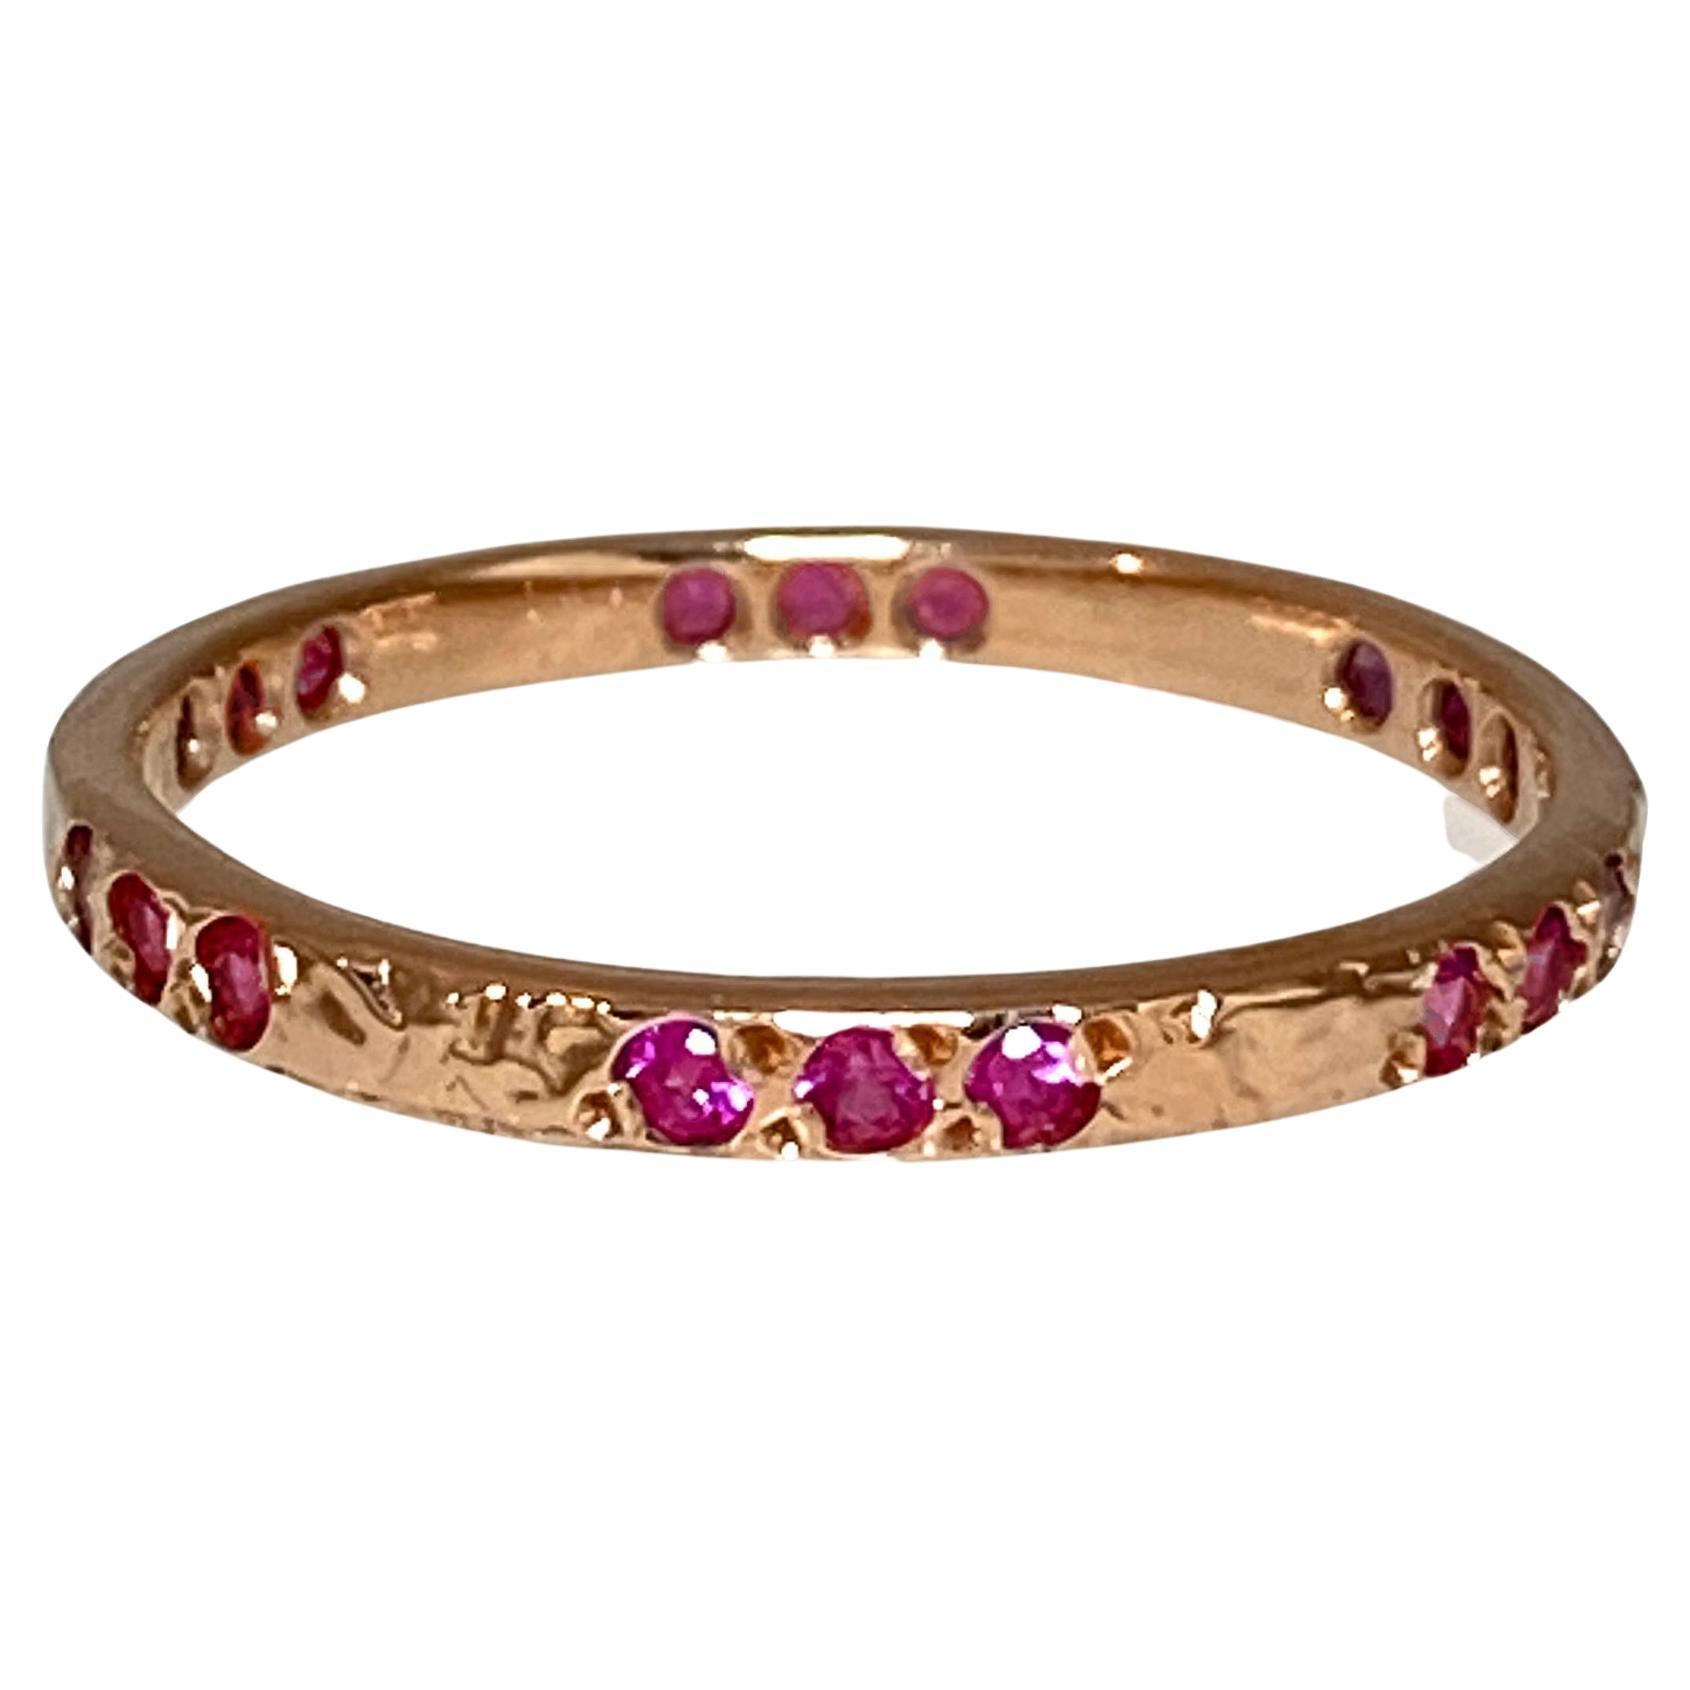 For Sale:  Pink Sapphire set in Textured 14 Karat Rose Gold Band from K.MITA - Large